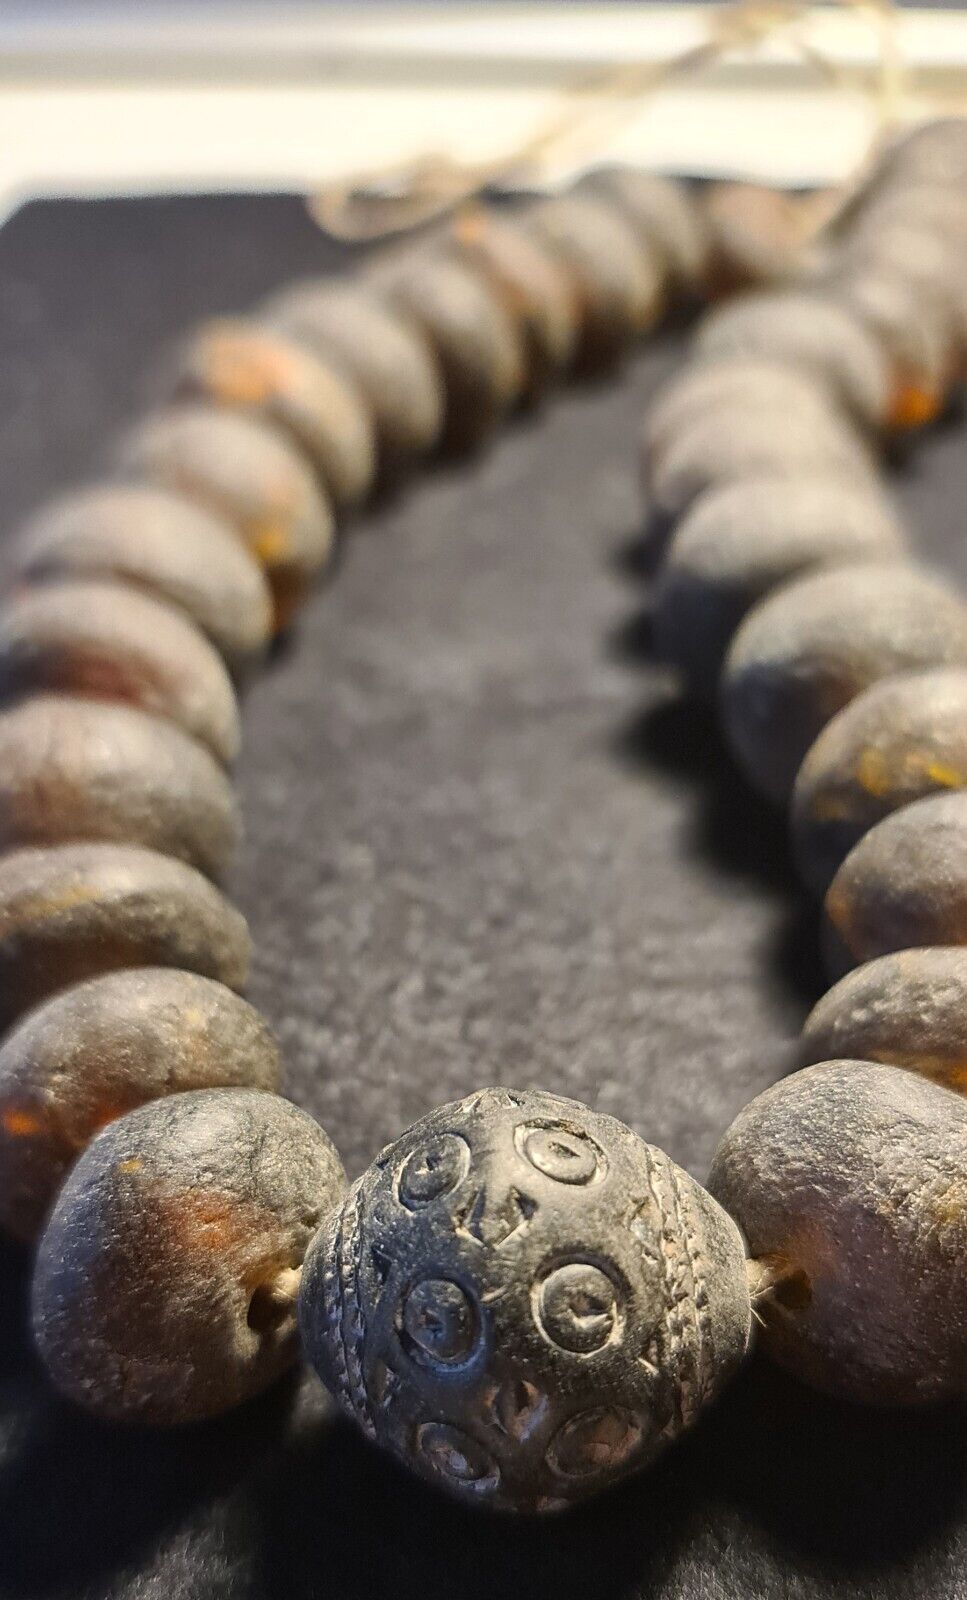 Ancient Roman Glass Bead Necklace.Very Rare 1st - 3rd century AD